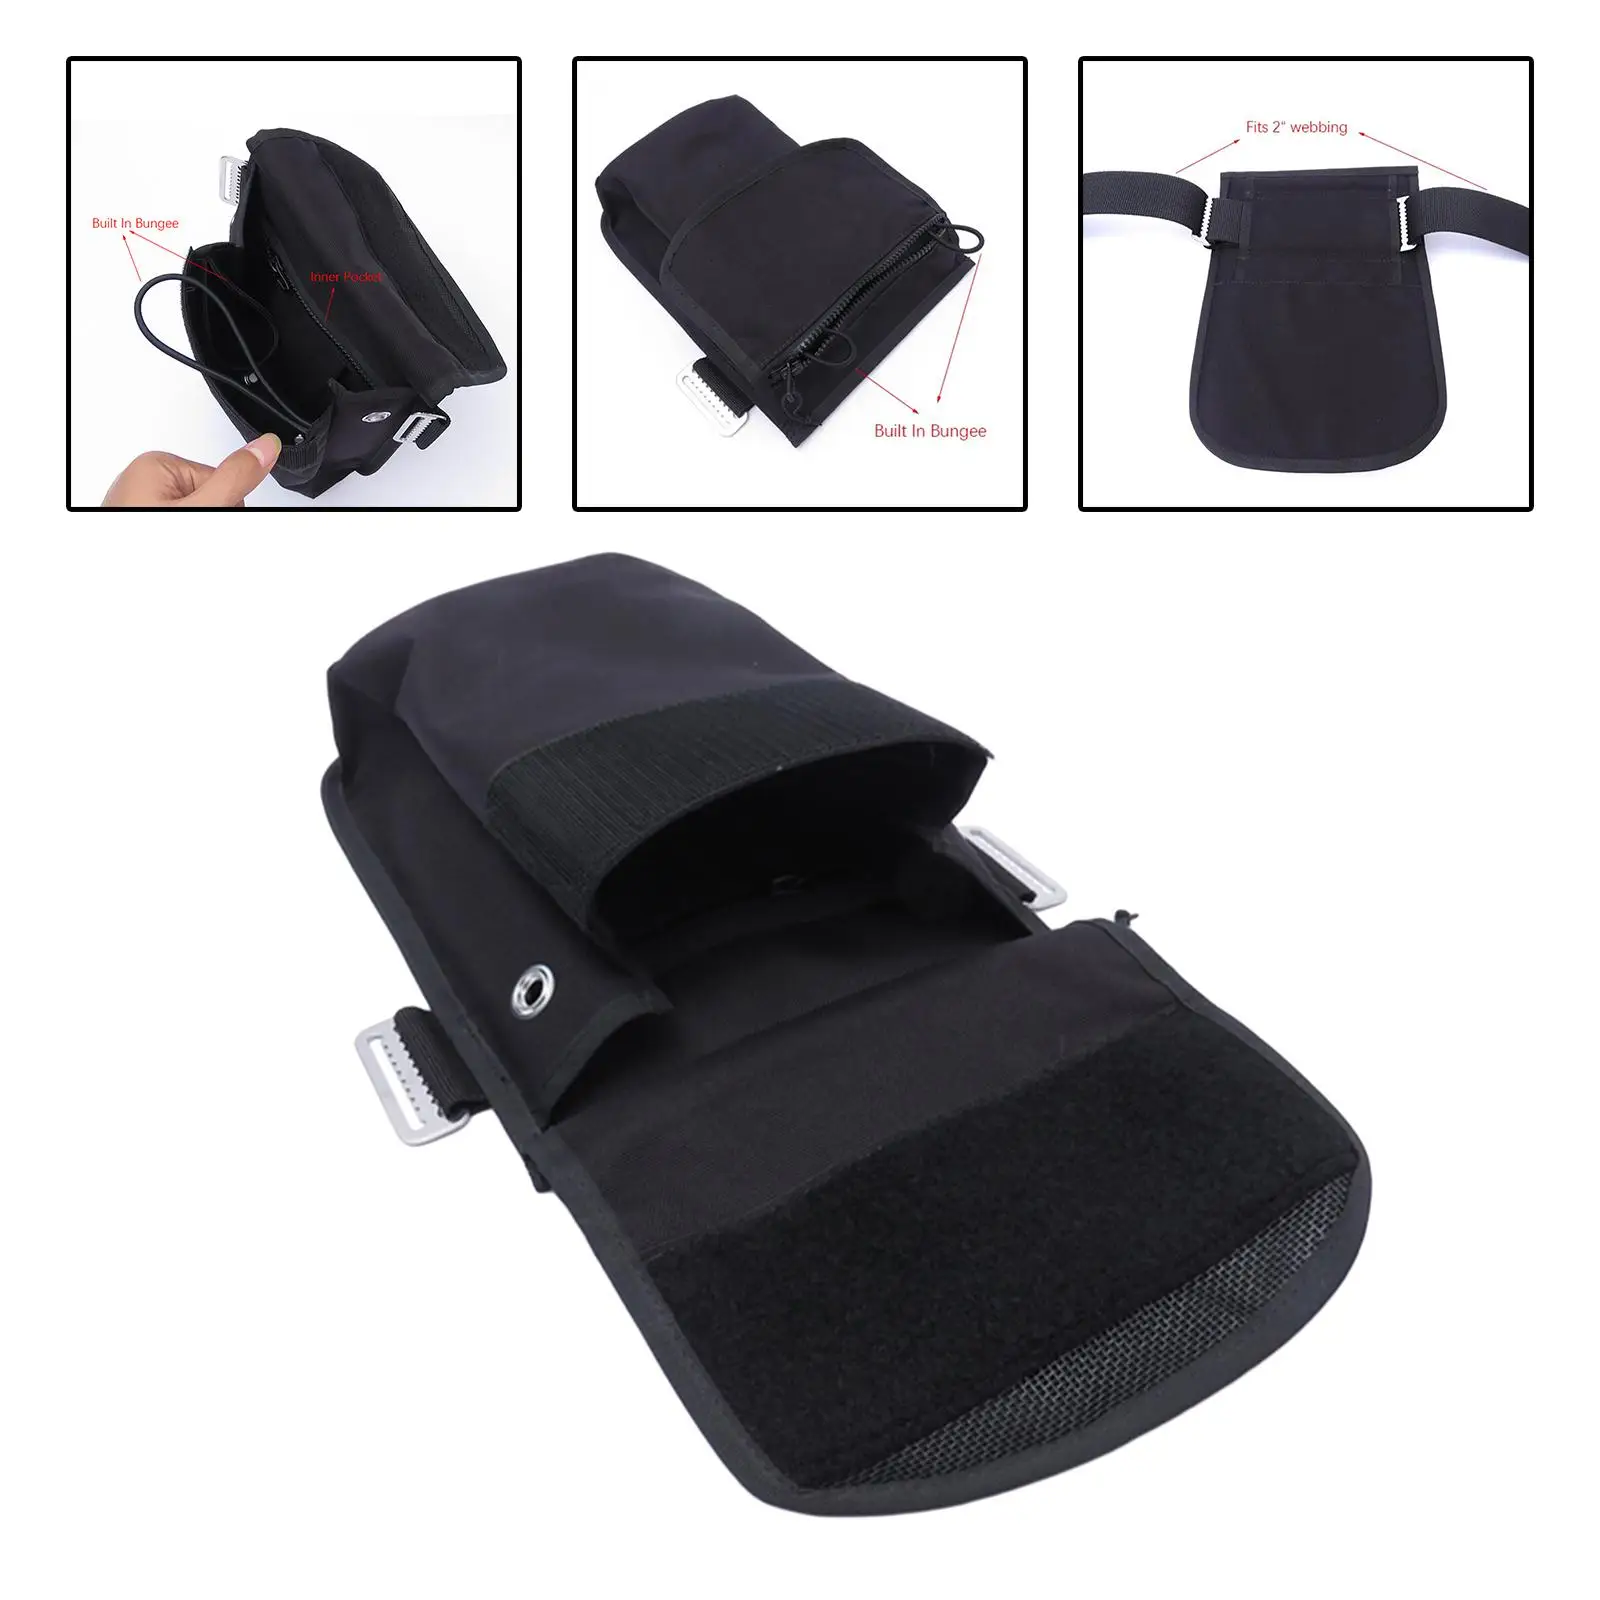 Scuba Diving Thigh Pocket Carrying Bag Storage Pocket Carry Pouch Snorkeling Equipment Holder Weight Pocket for Underwater Black